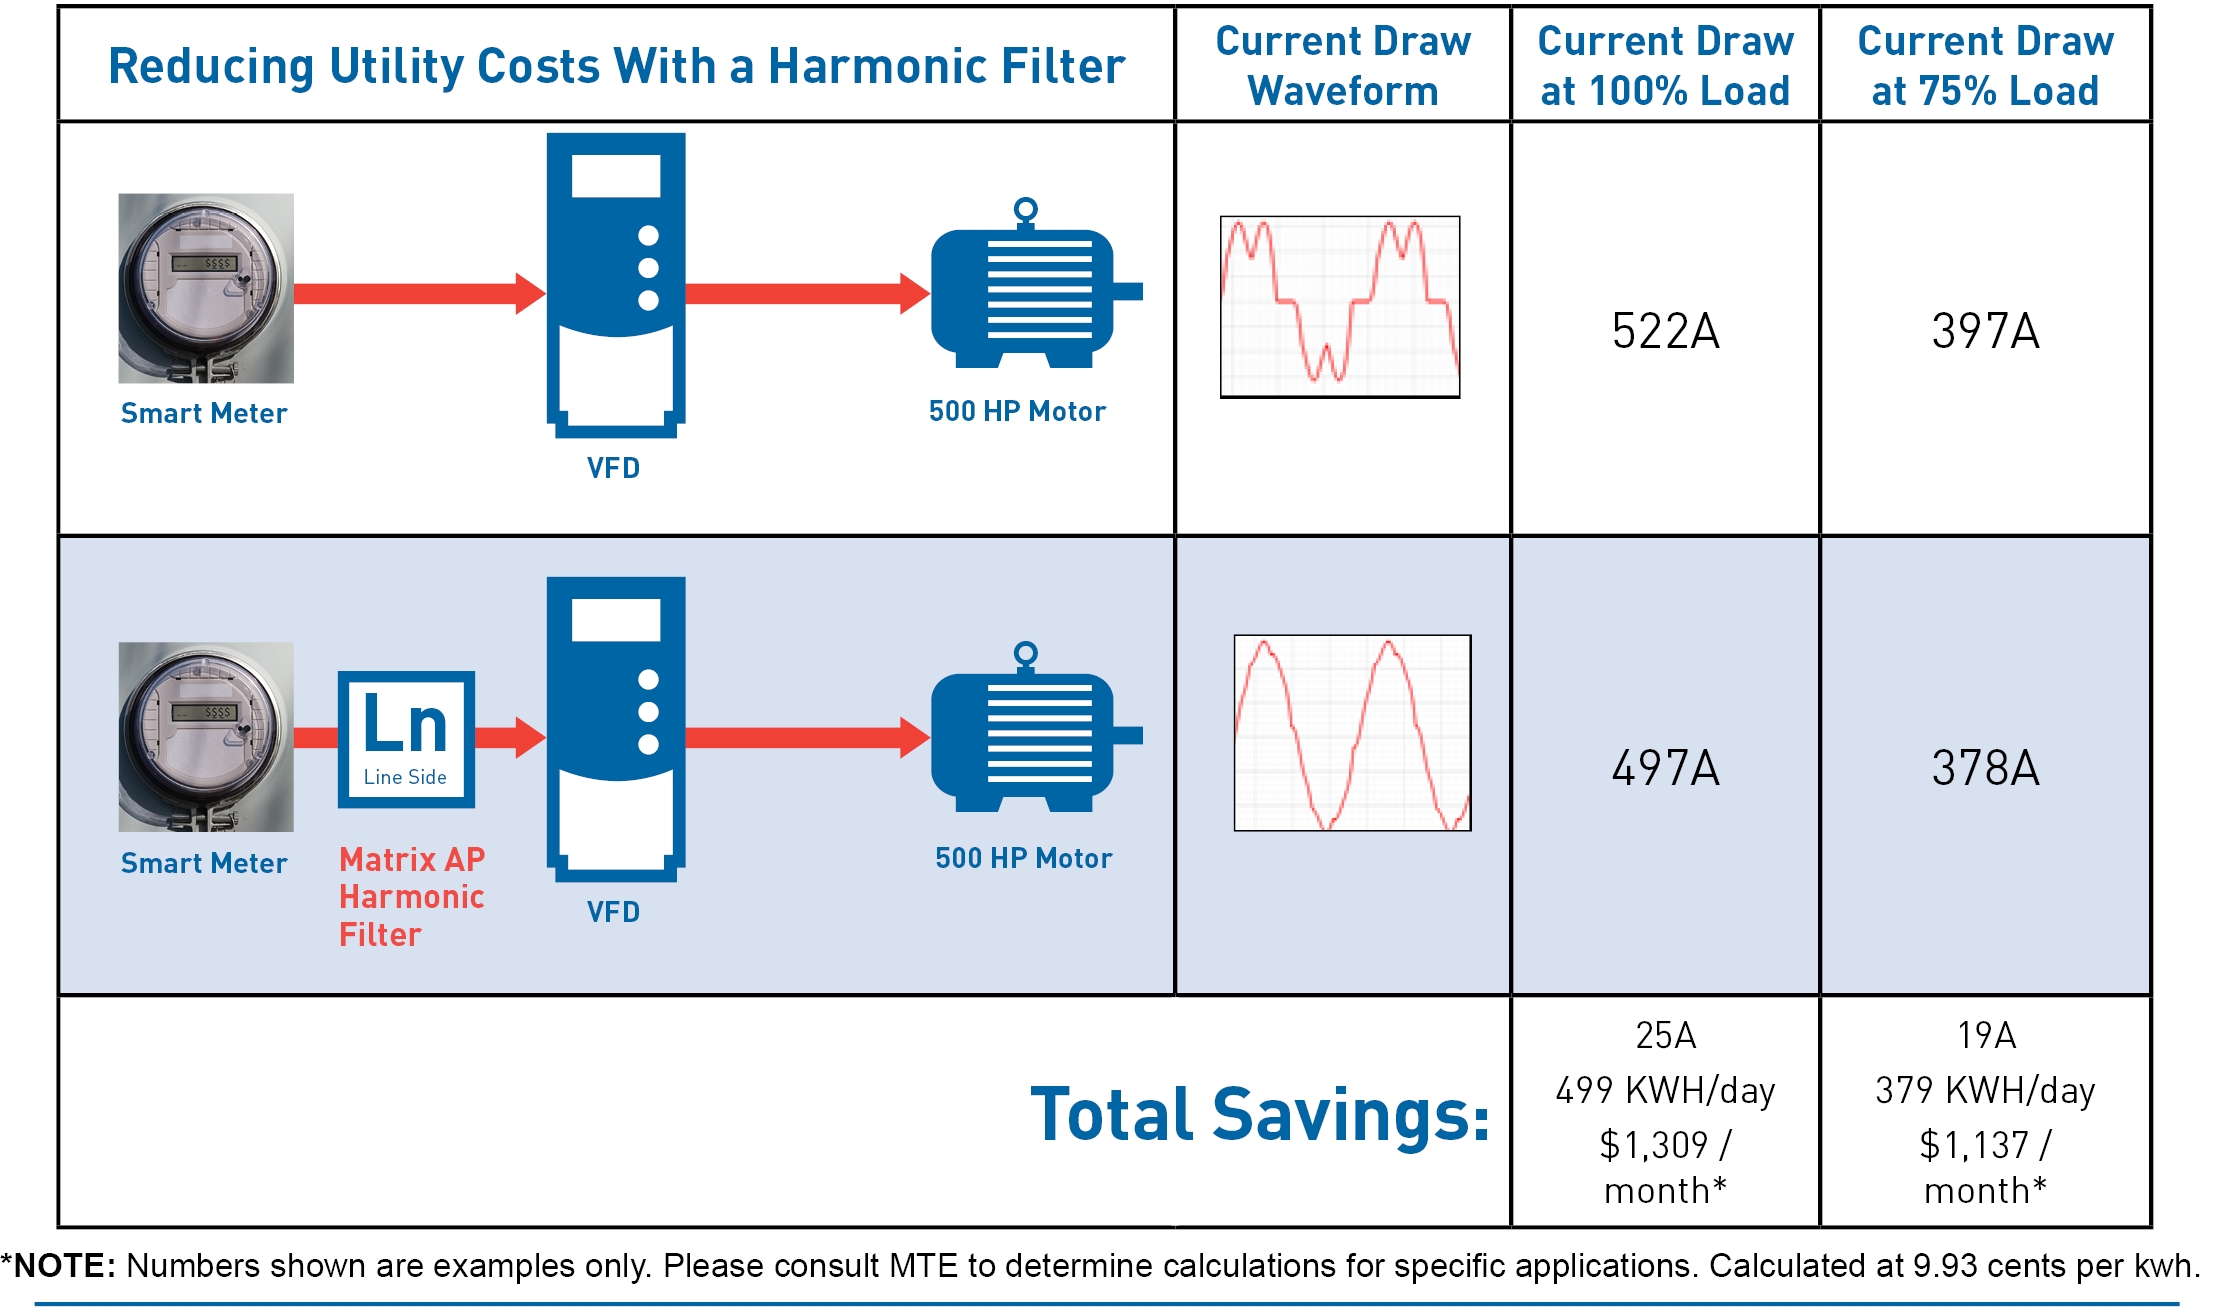 Utility Cost Savings From Reducing Harmonic Distortion